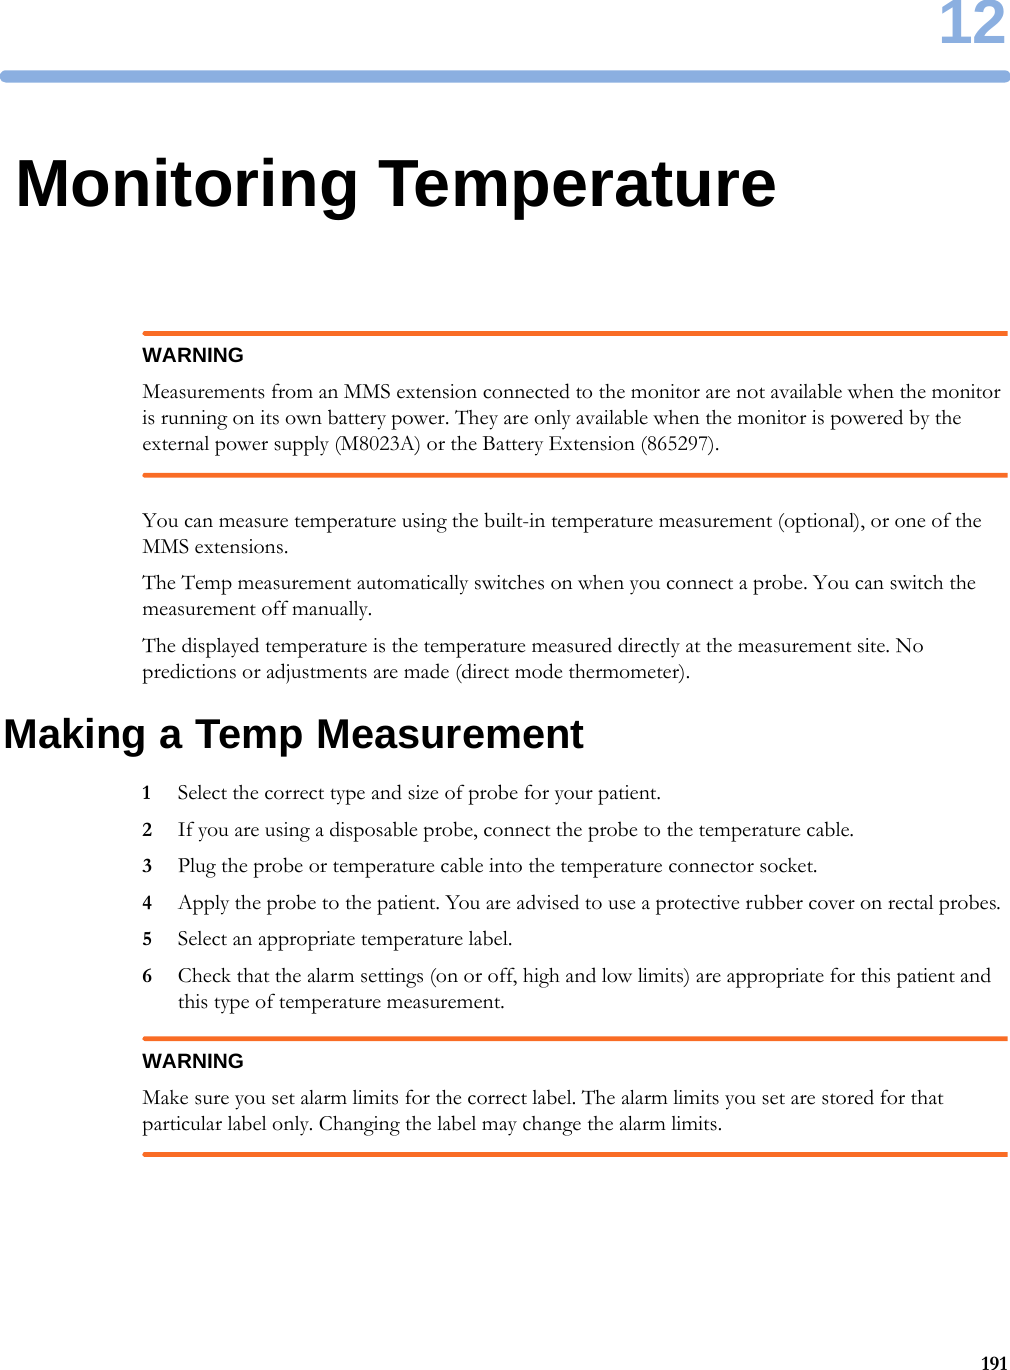 1219112Monitoring TemperatureWARNINGMeasurements from an MMS extension connected to the monitor are not available when the monitor is running on its own battery power. They are only available when the monitor is powered by the external power supply (M8023A) or the Battery Extension (865297).You can measure temperature using the built-in temperature measurement (optional), or one of the MMS extensions.The Temp measurement automatically switches on when you connect a probe. You can switch the measurement off manually.The displayed temperature is the temperature measured directly at the measurement site. No predictions or adjustments are made (direct mode thermometer).Making a Temp Measurement1Select the correct type and size of probe for your patient.2If you are using a disposable probe, connect the probe to the temperature cable.3Plug the probe or temperature cable into the temperature connector socket.4Apply the probe to the patient. You are advised to use a protective rubber cover on rectal probes.5Select an appropriate temperature label.6Check that the alarm settings (on or off, high and low limits) are appropriate for this patient and this type of temperature measurement.WARNINGMake sure you set alarm limits for the correct label. The alarm limits you set are stored for that particular label only. Changing the label may change the alarm limits.